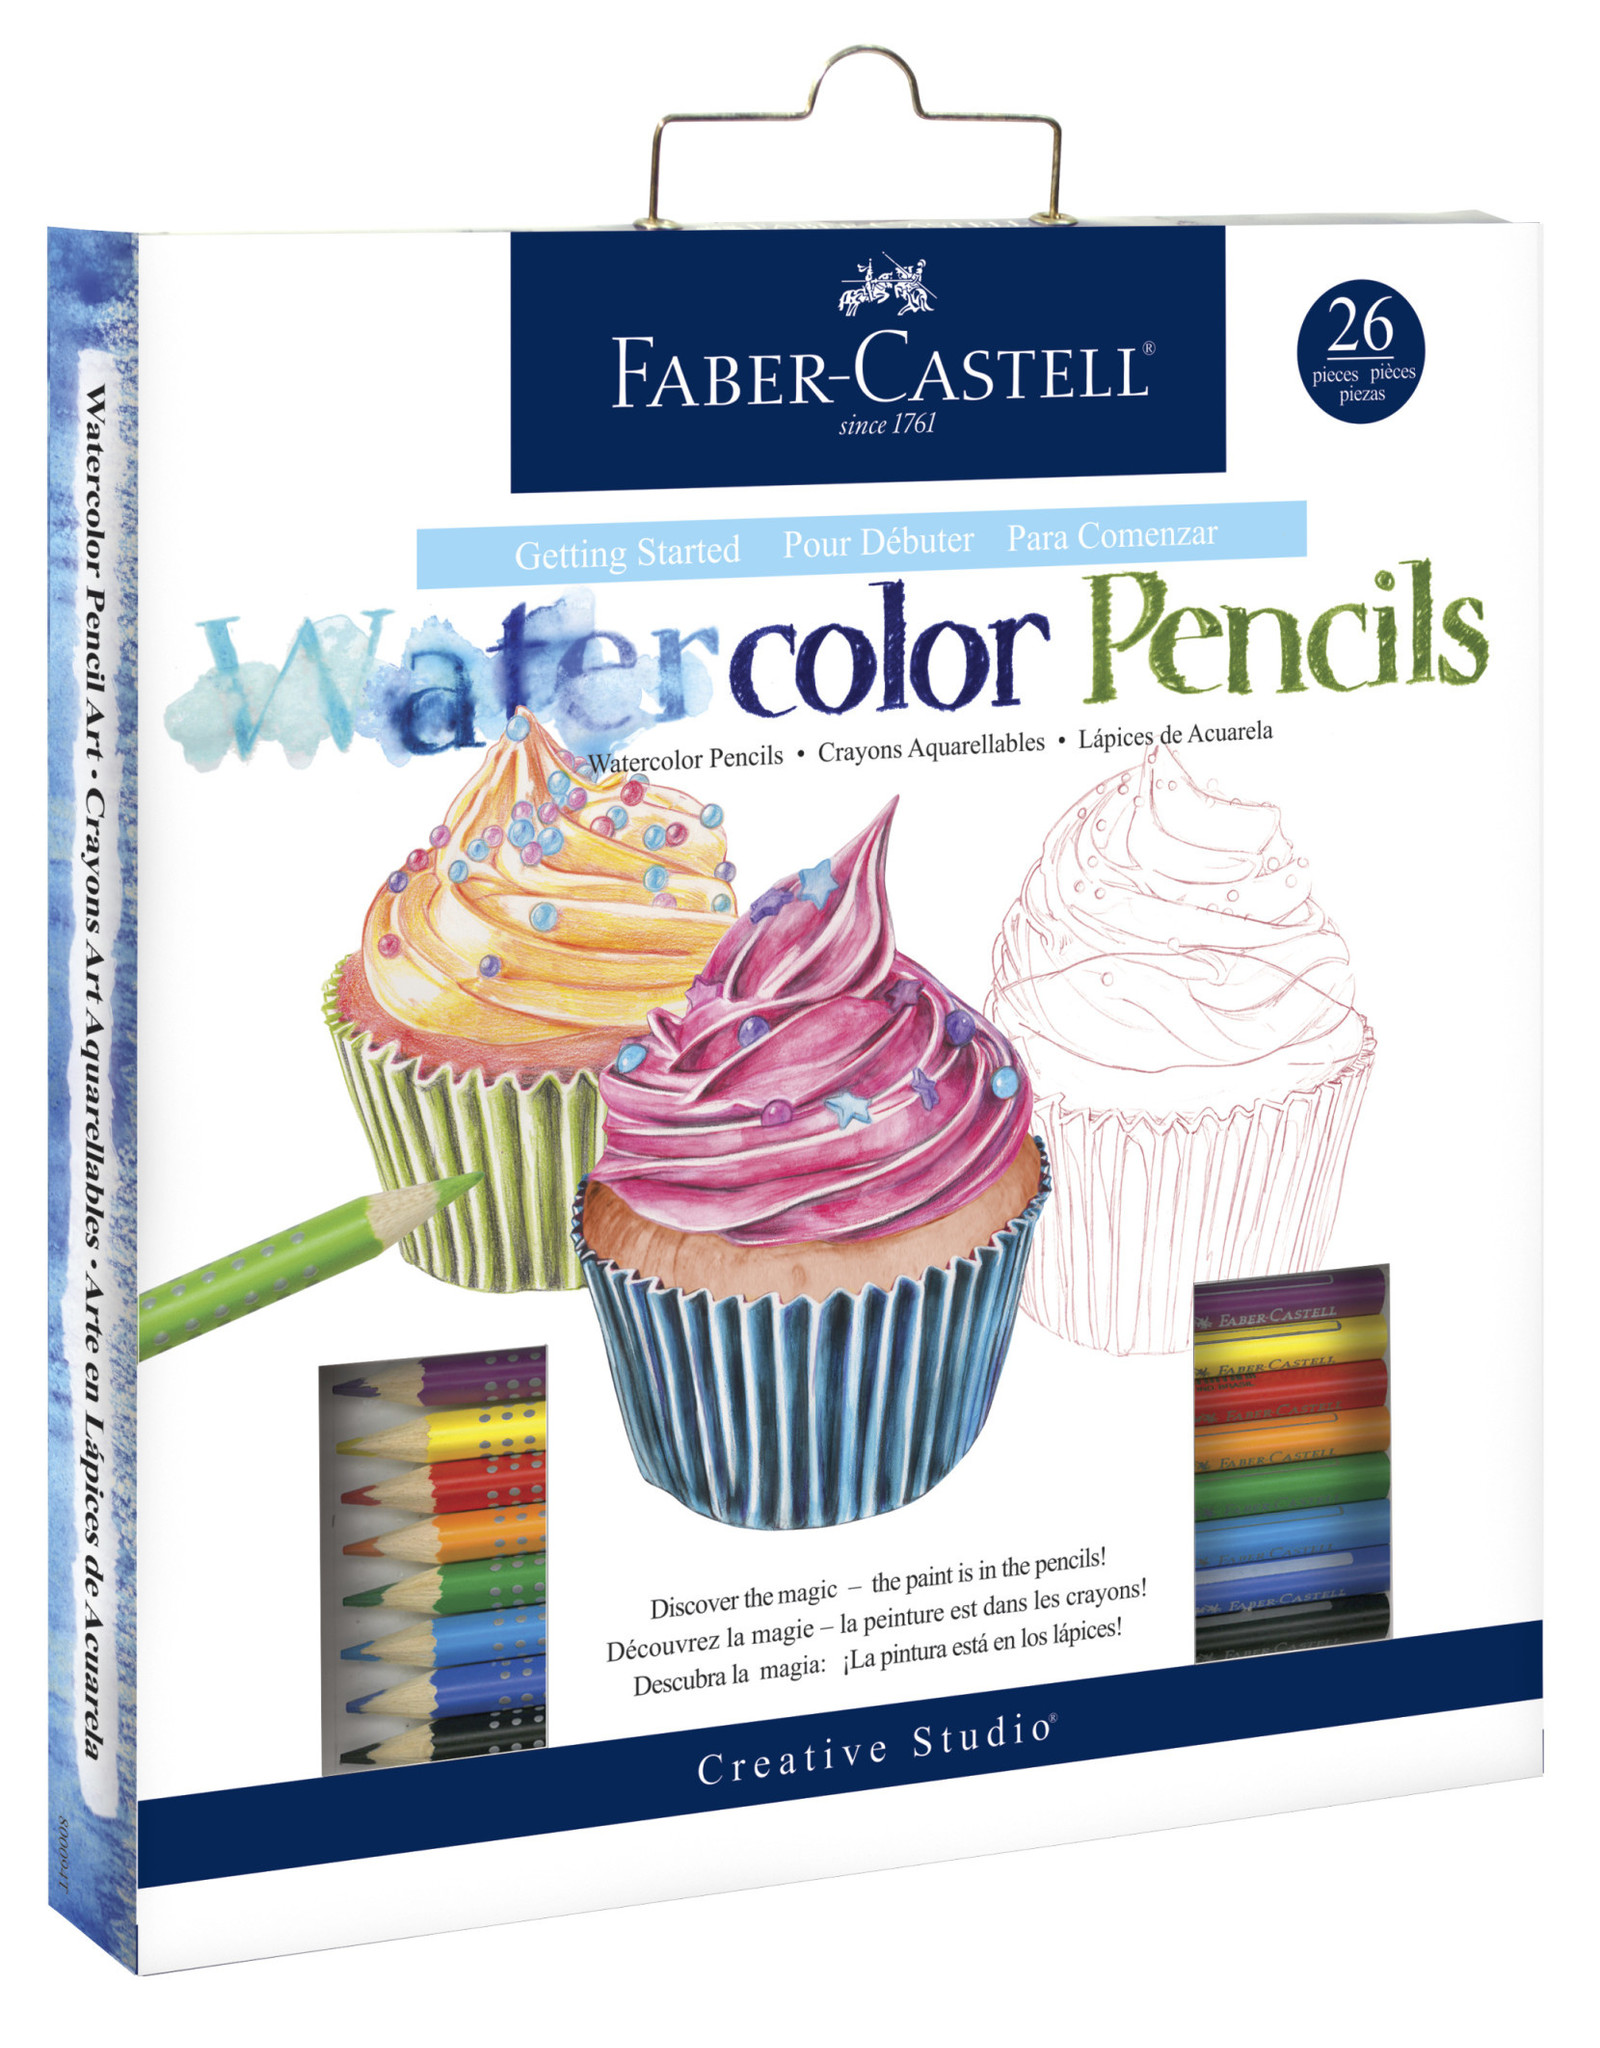 FABER-CASTELL Getting Started: Watercolor Pencil Art